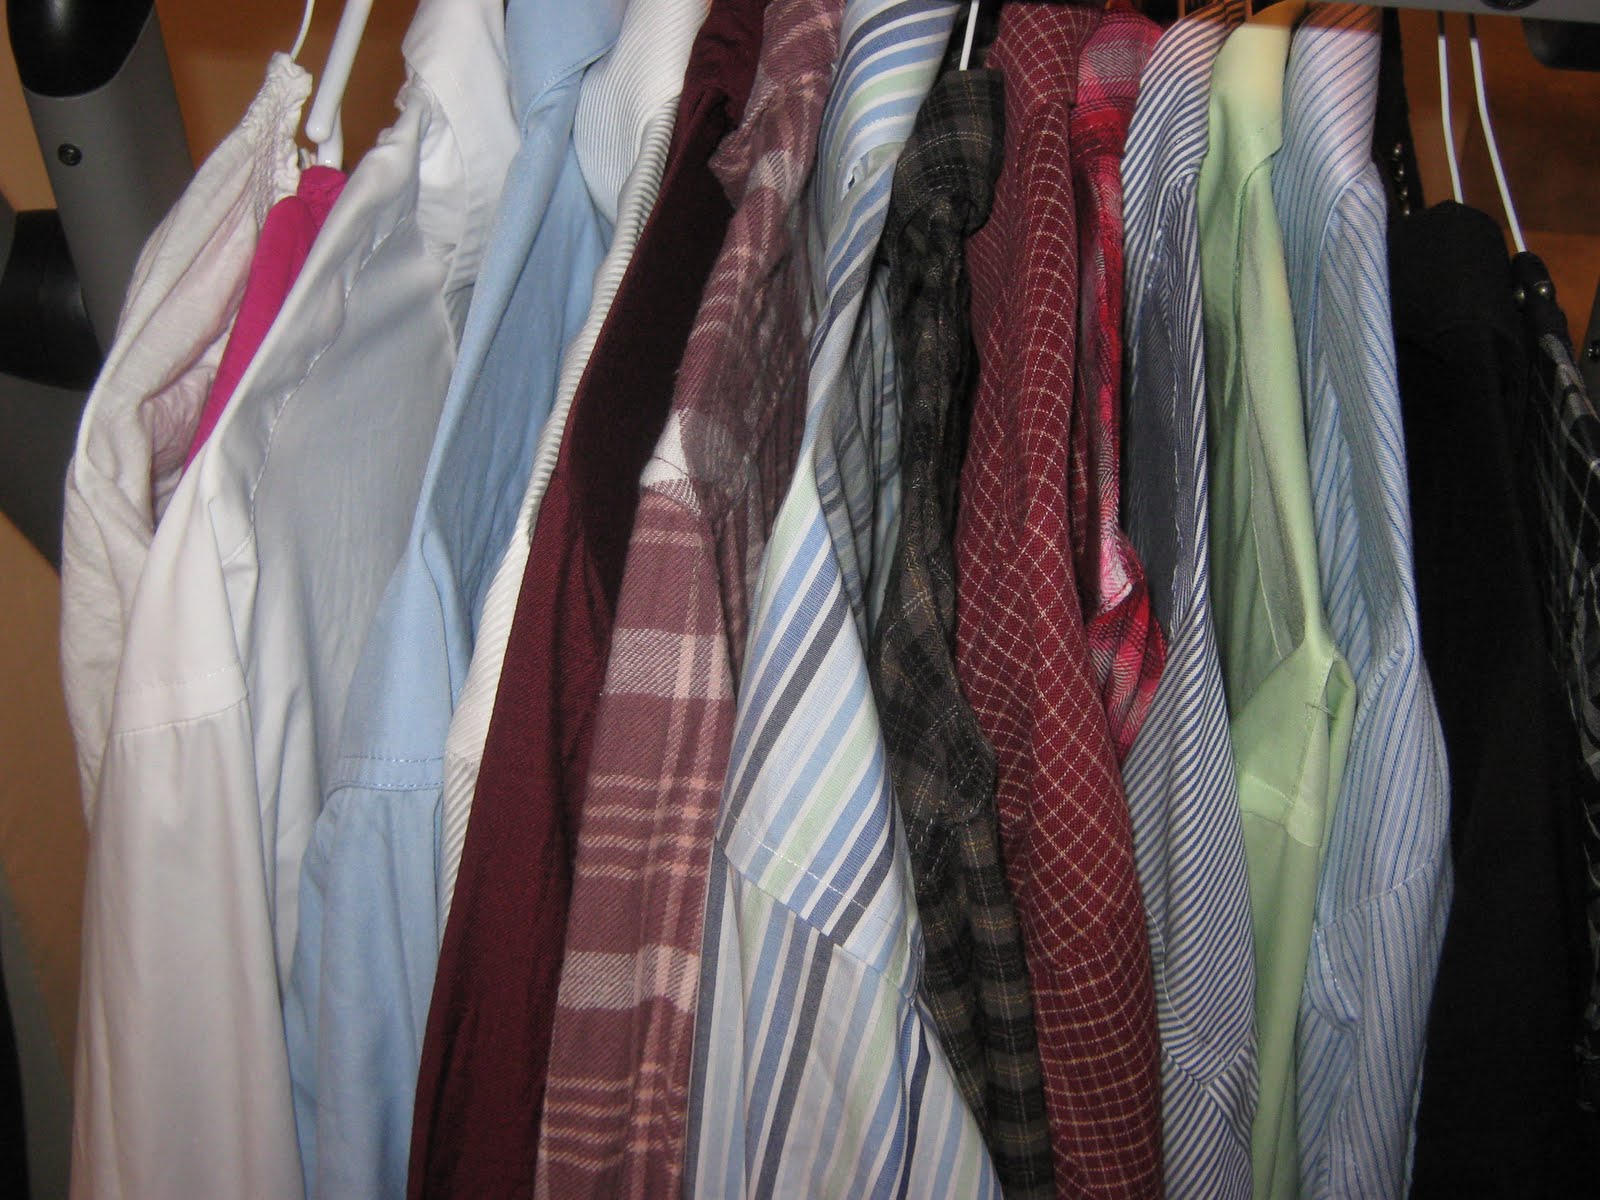 Fake-It Frugal: Why Pay? Dry Cleaning